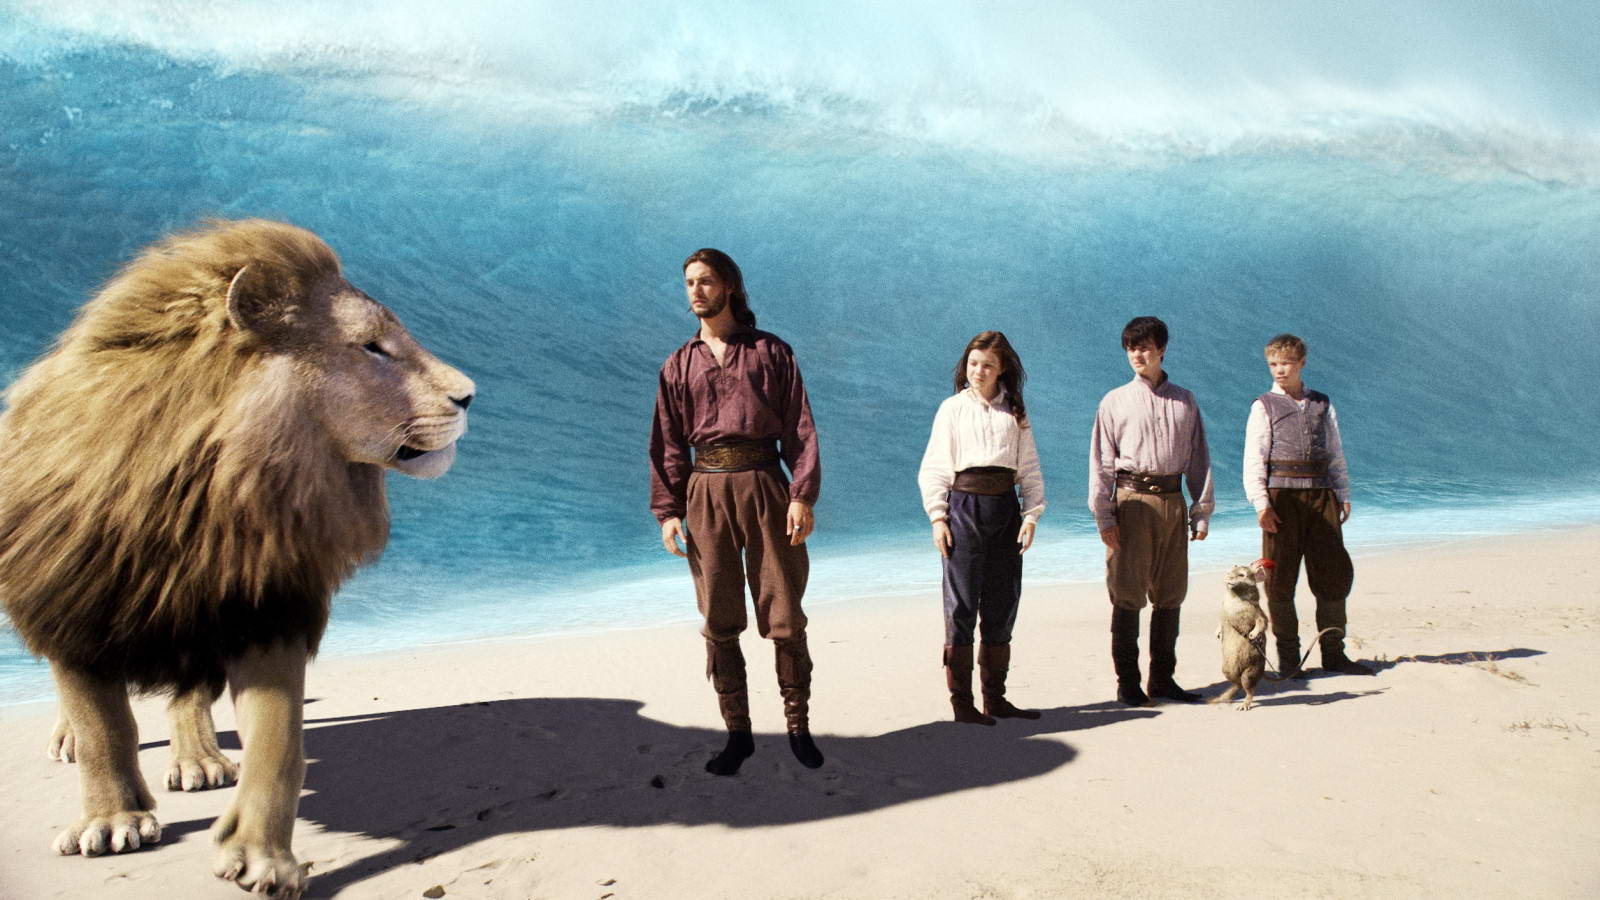 Game movies: the chronicles of narnia: prince caspian trailer #3.